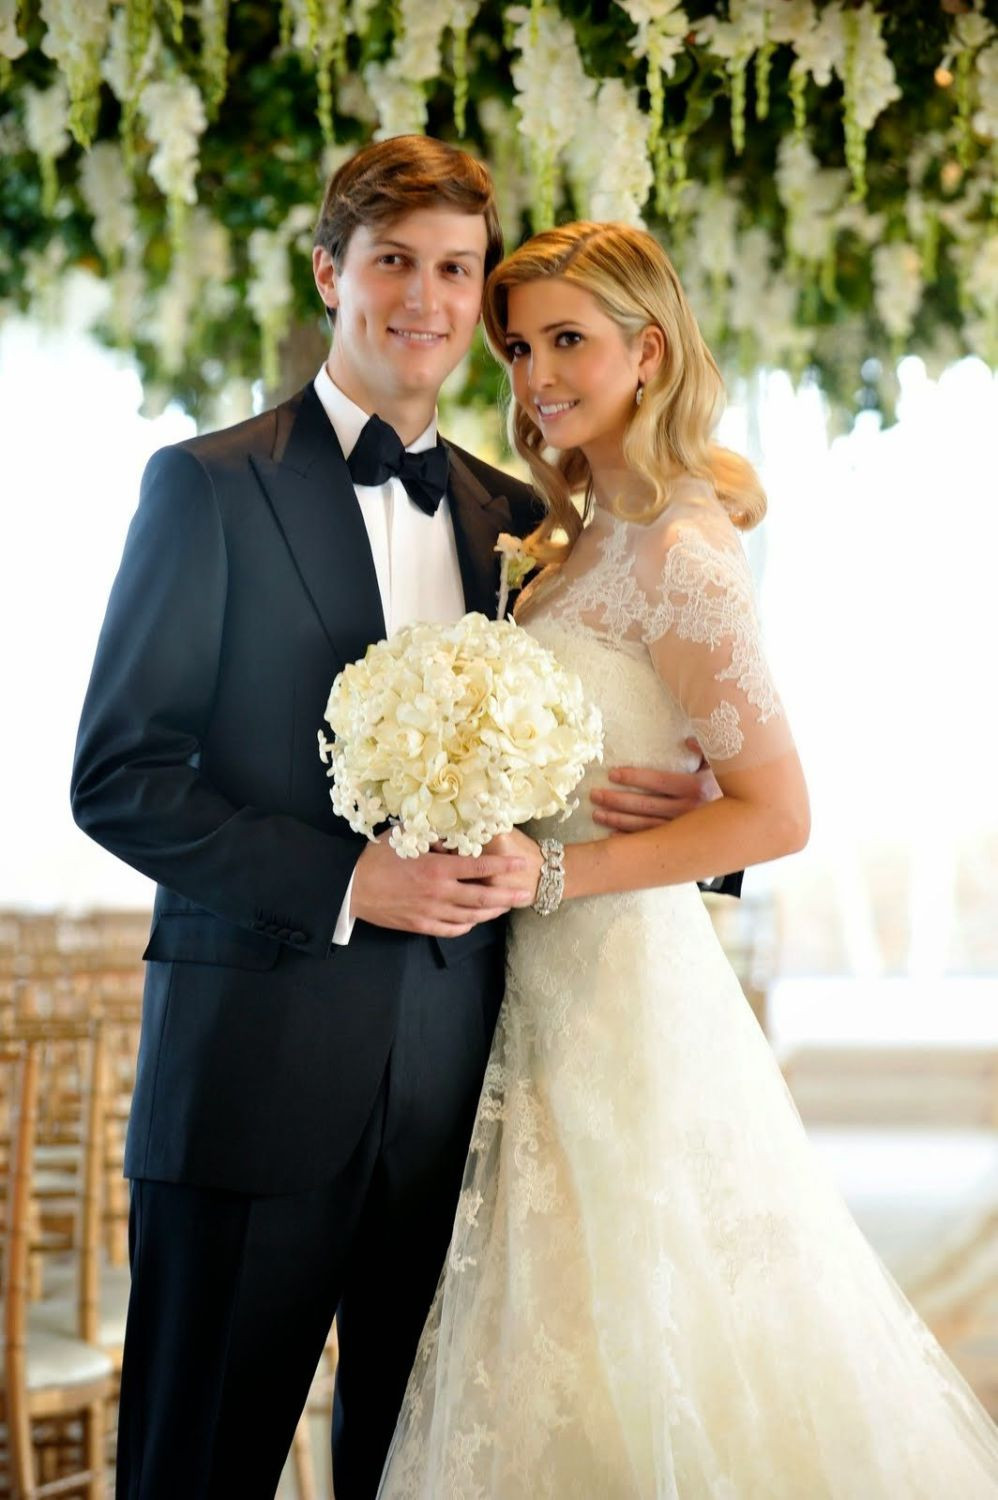 Ivanka Trump Wedding Gown
 10 Iconic Wedding Gowns That Continue To Inspire